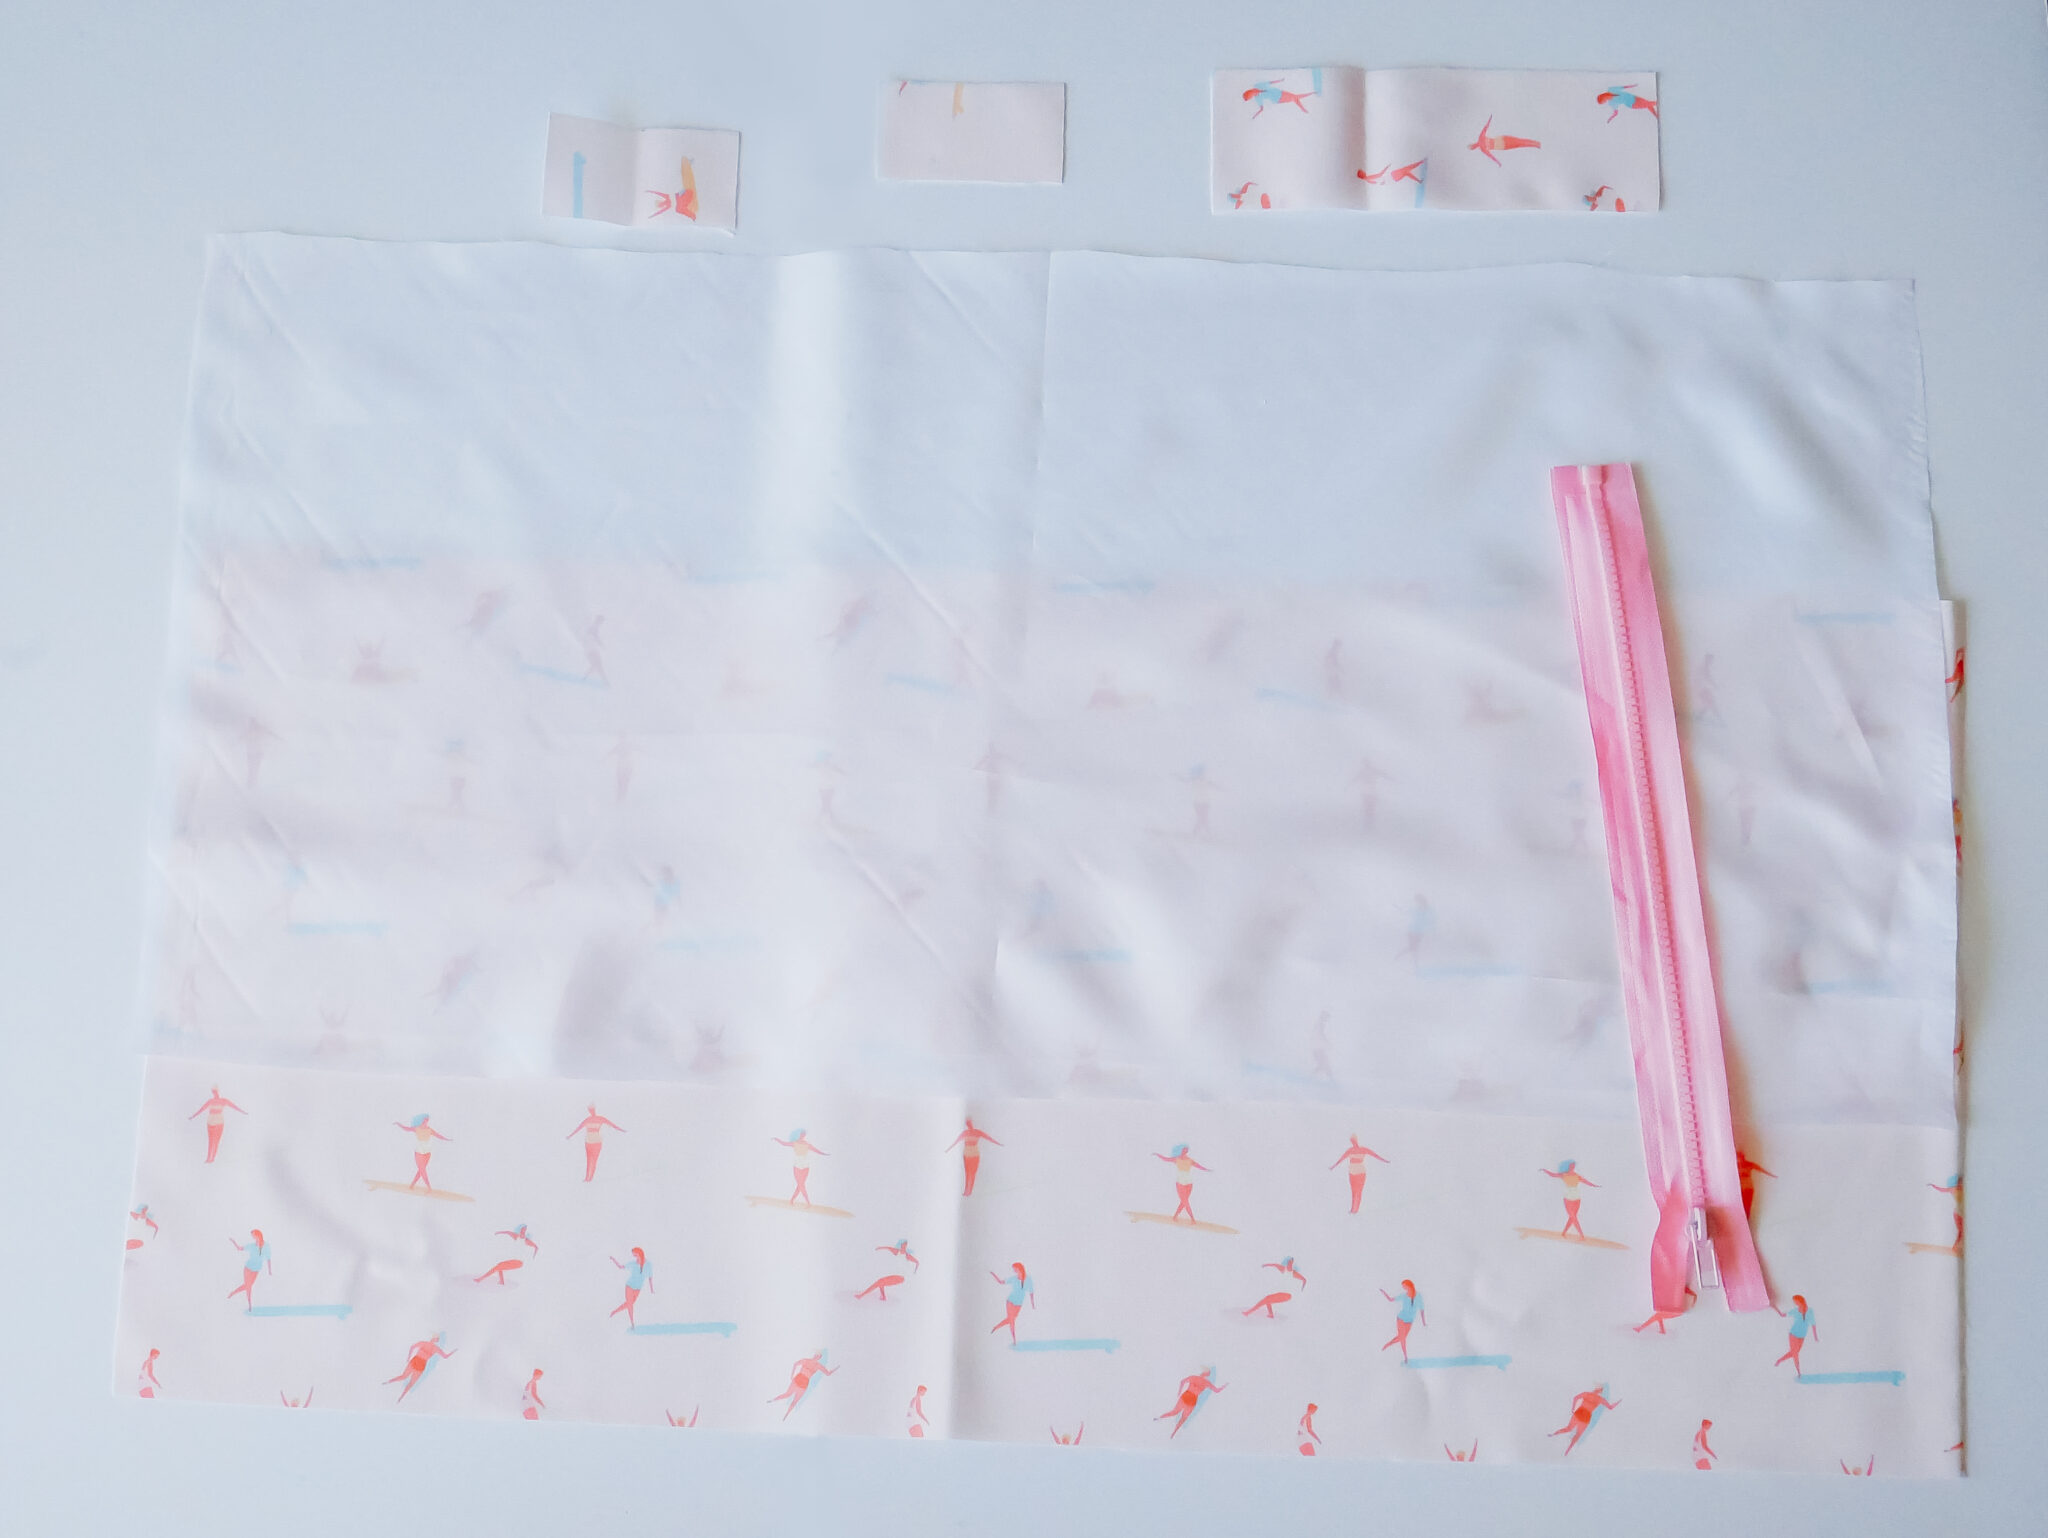 Two rectangle pieces of fabric for the wet bag are lying on a white surface. The piece on top has been cut out of Polyurethane Laminate. The piece on the bottom has a design featuring small female surfers surfing through a pink background. Three smaller rectangles in the pink fabric are at the top of image, two small rectangles to the left and one larger rectangle to the right. A pink zipper is lying on top of the fabric to the right.